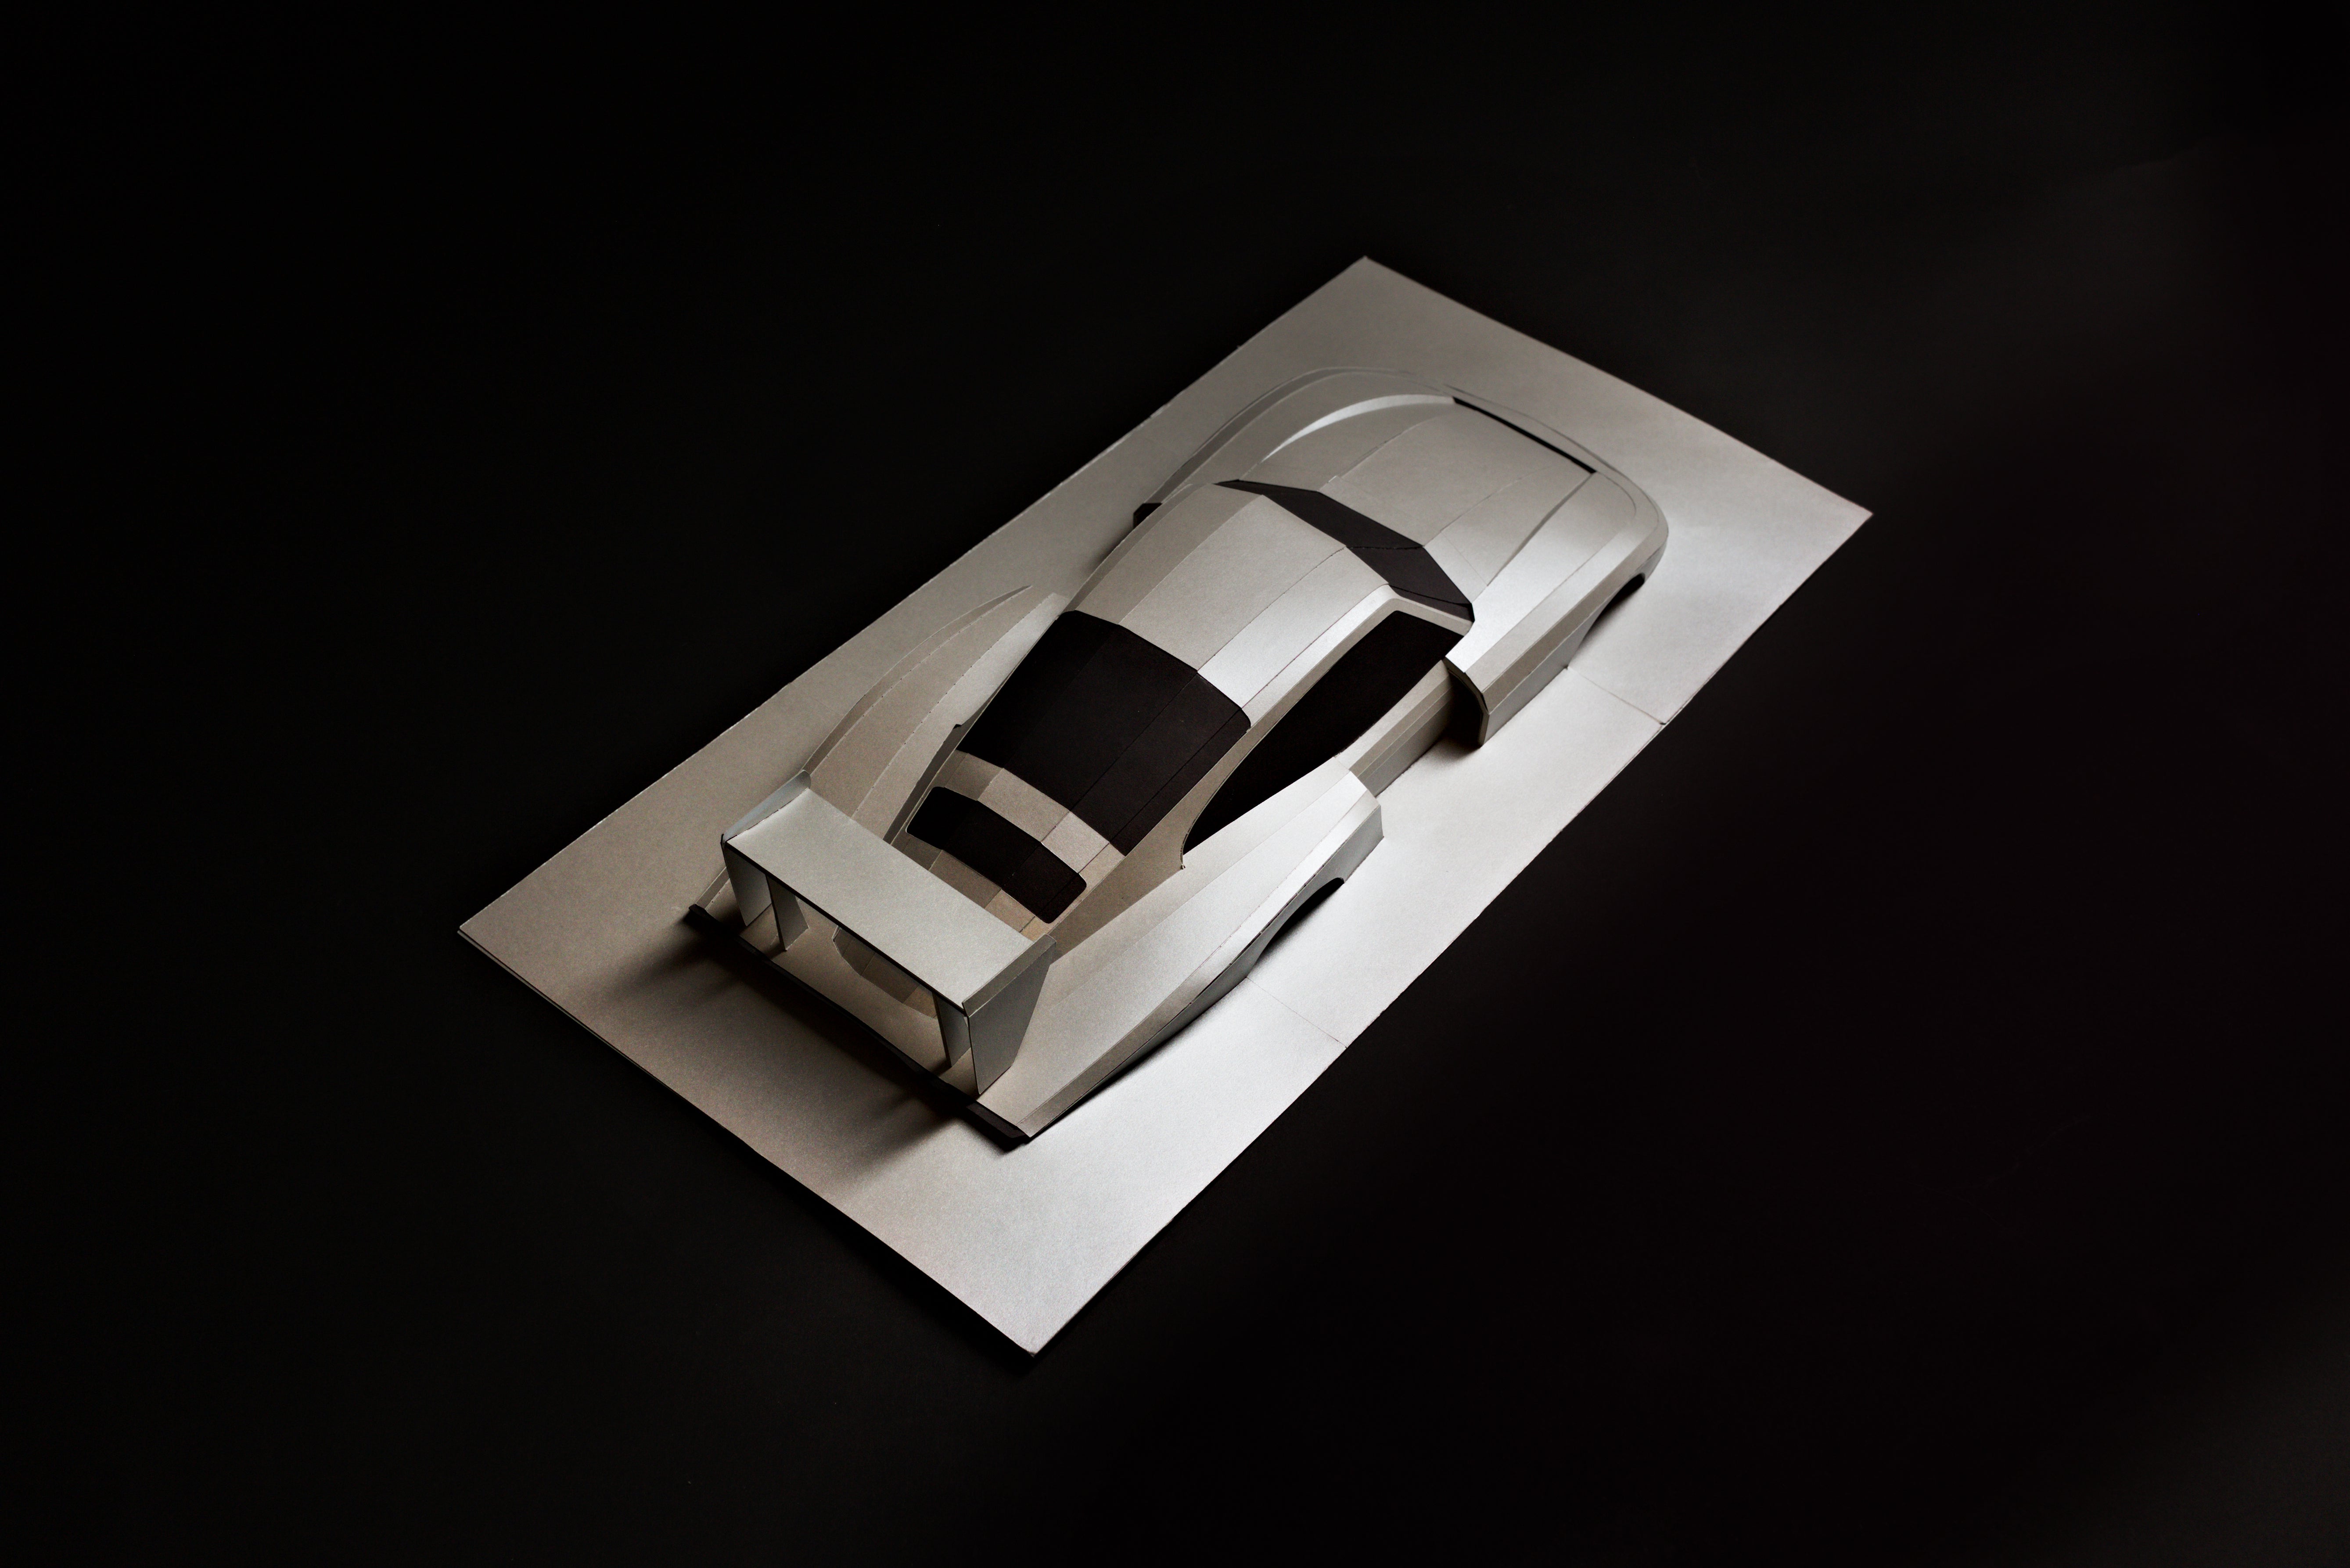 Whale Tail Papercraft Car Sculpture Kit - Top View